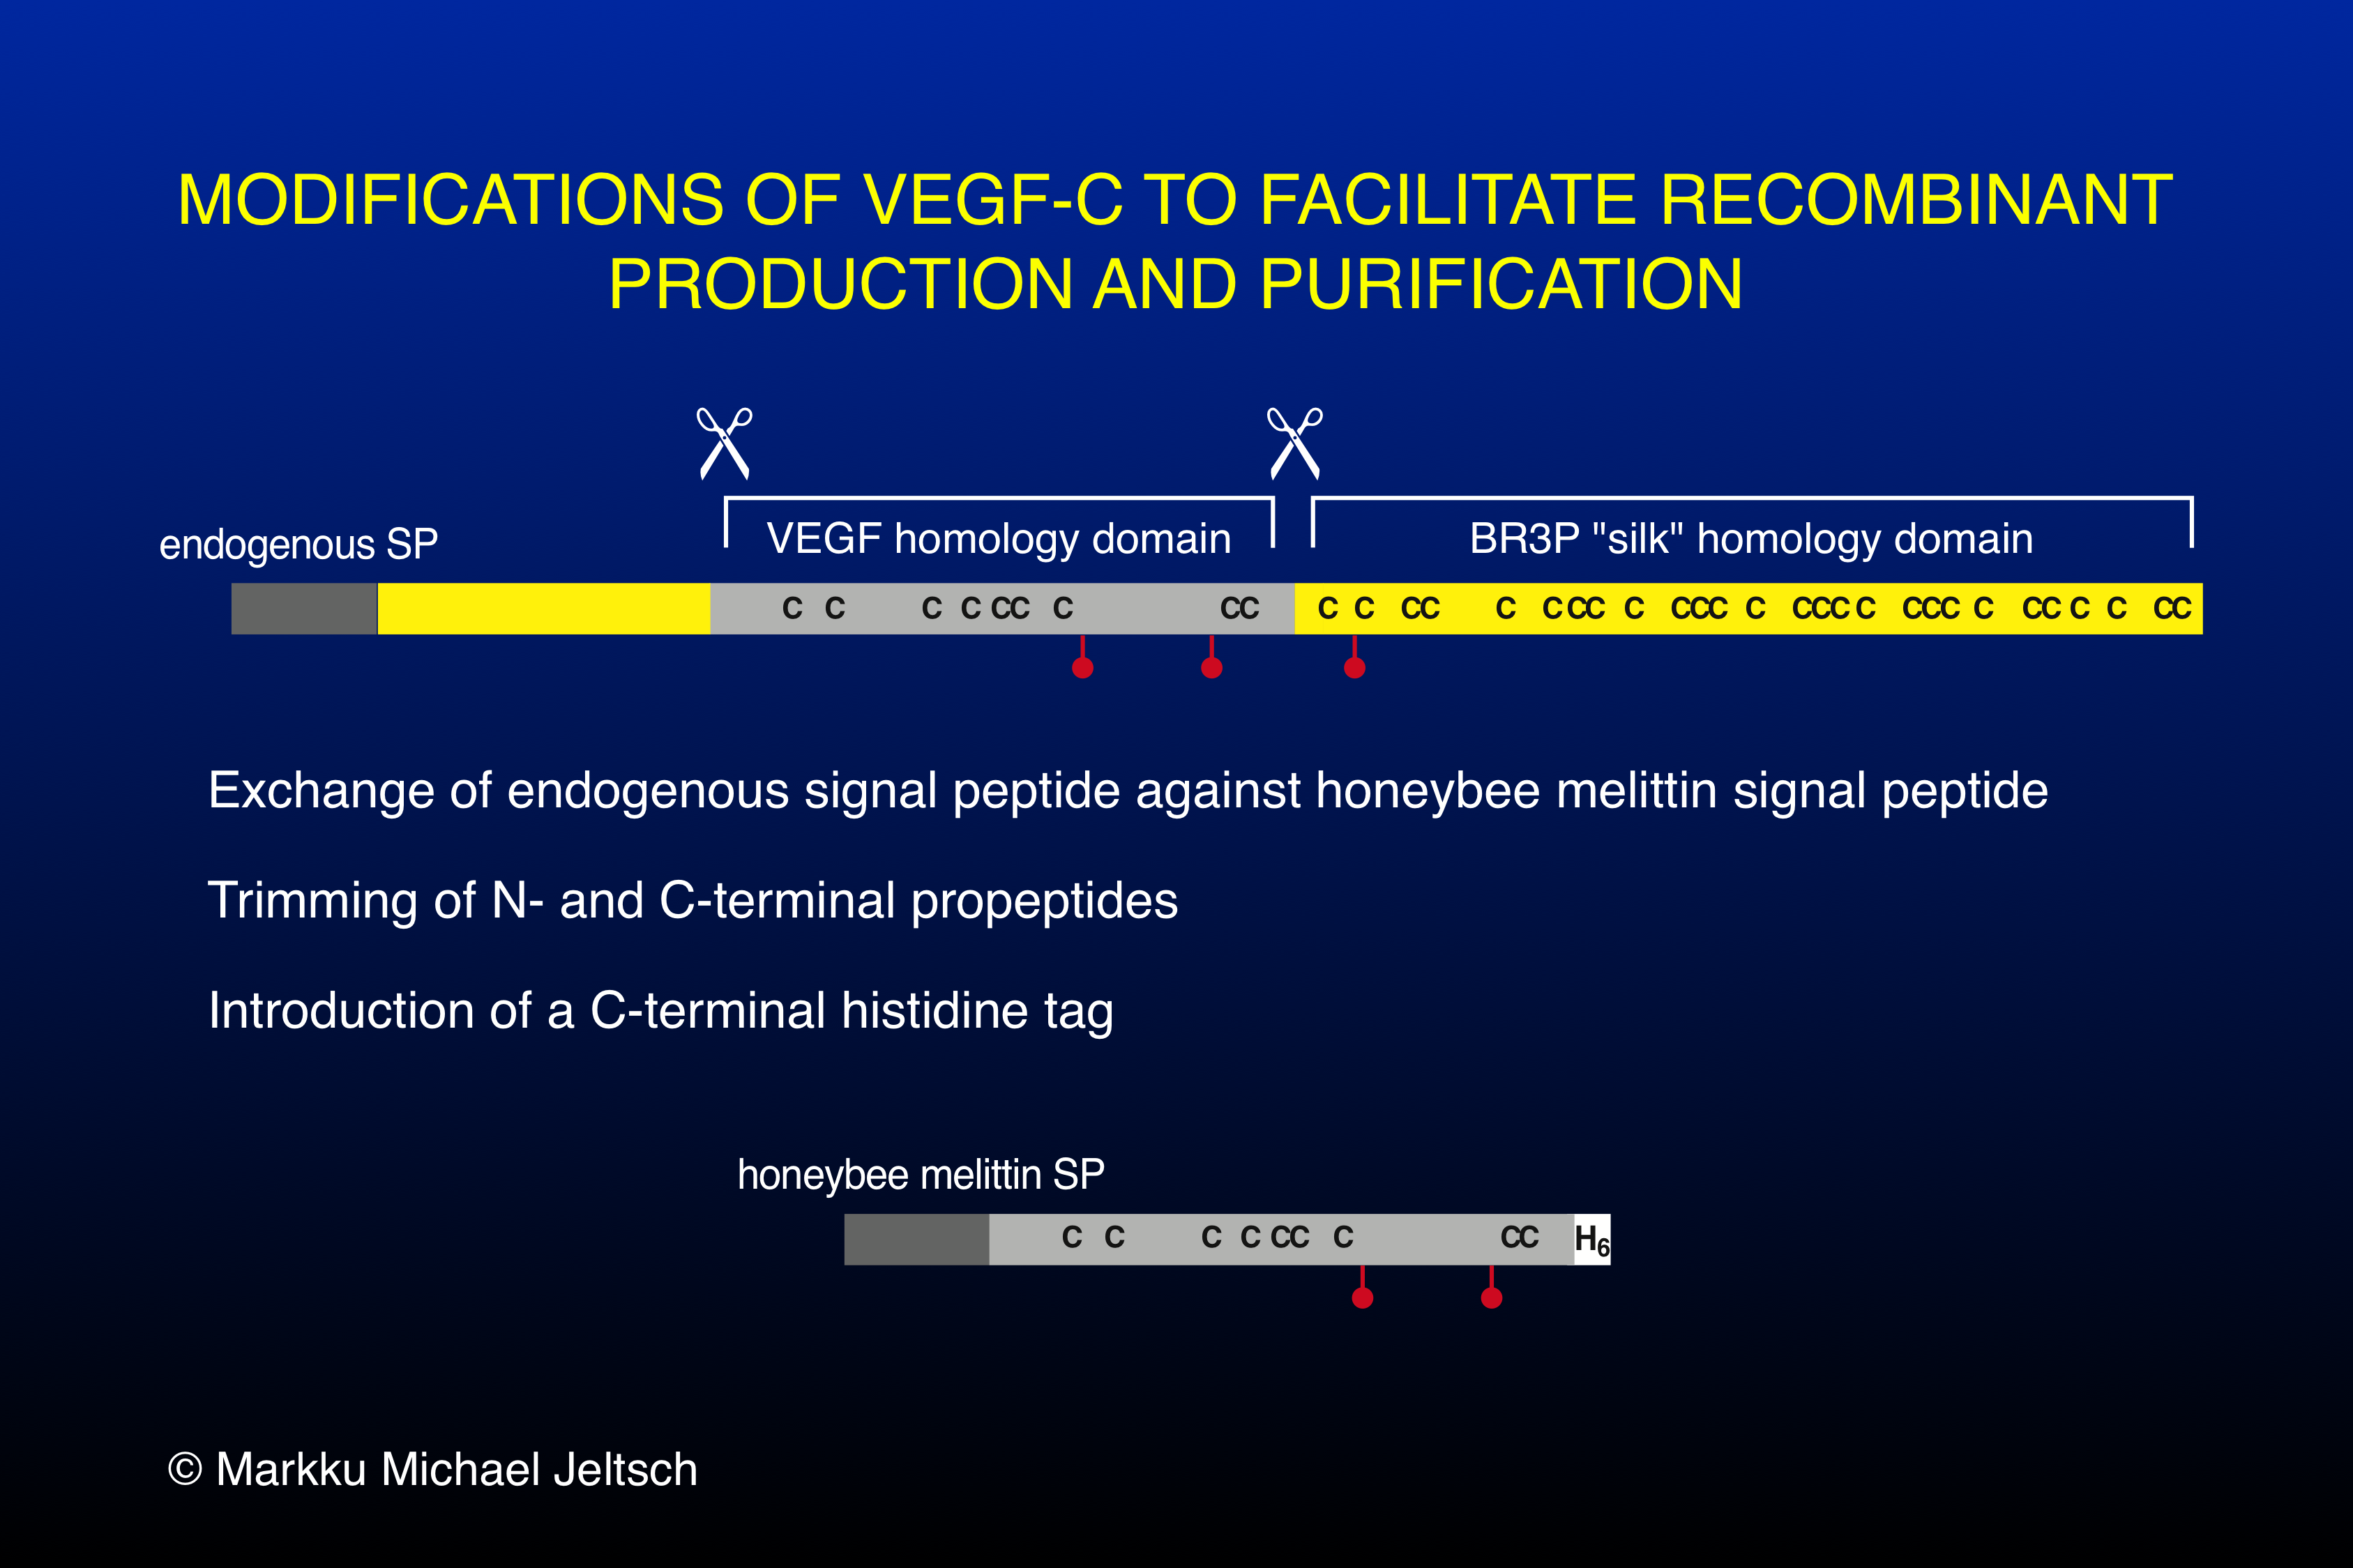 VEGF-C modifications to facilitate recombinant protein production & purification